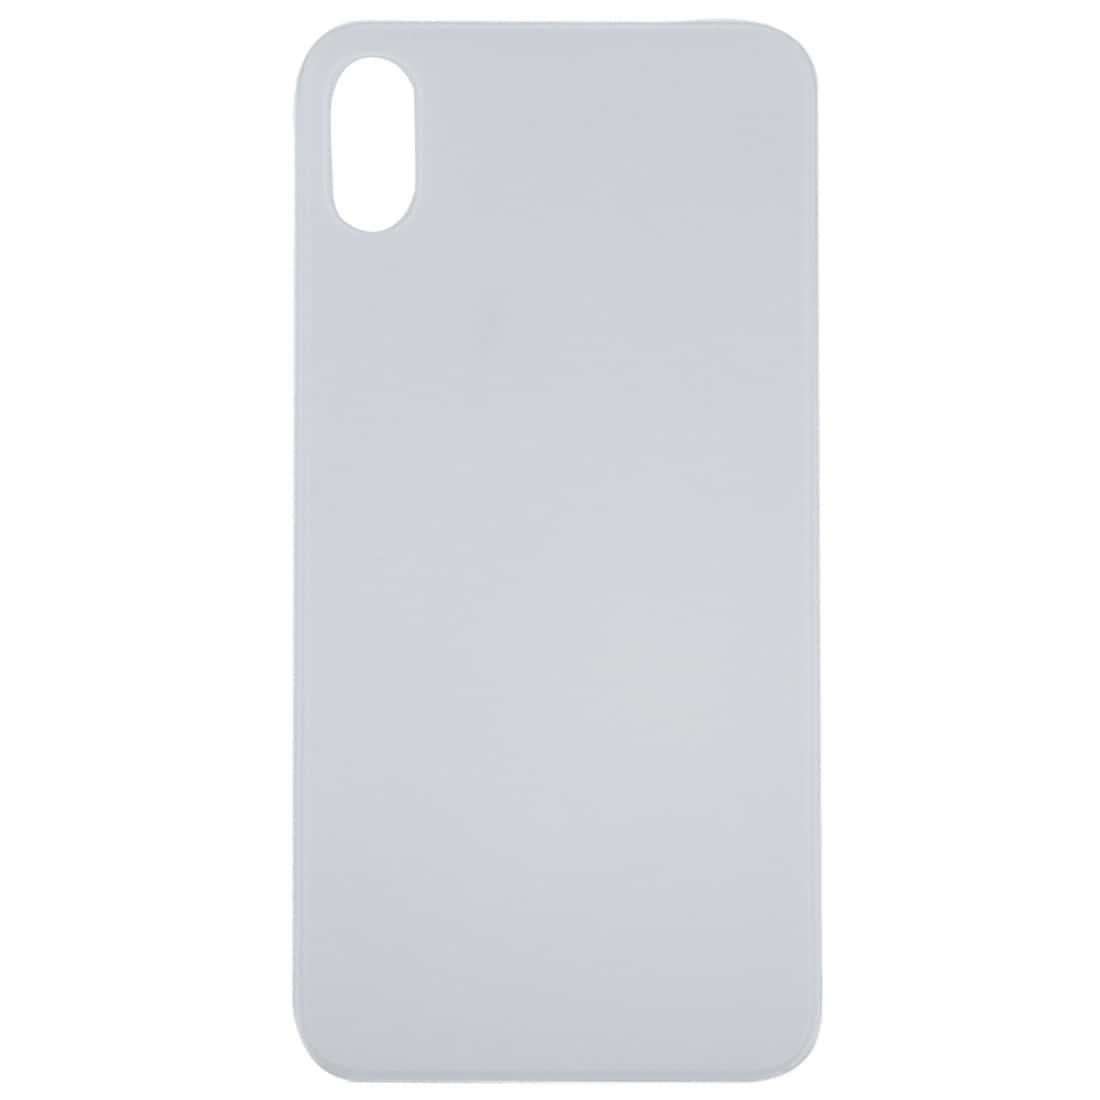 Back Glass Panel for  iPhone XS Max White